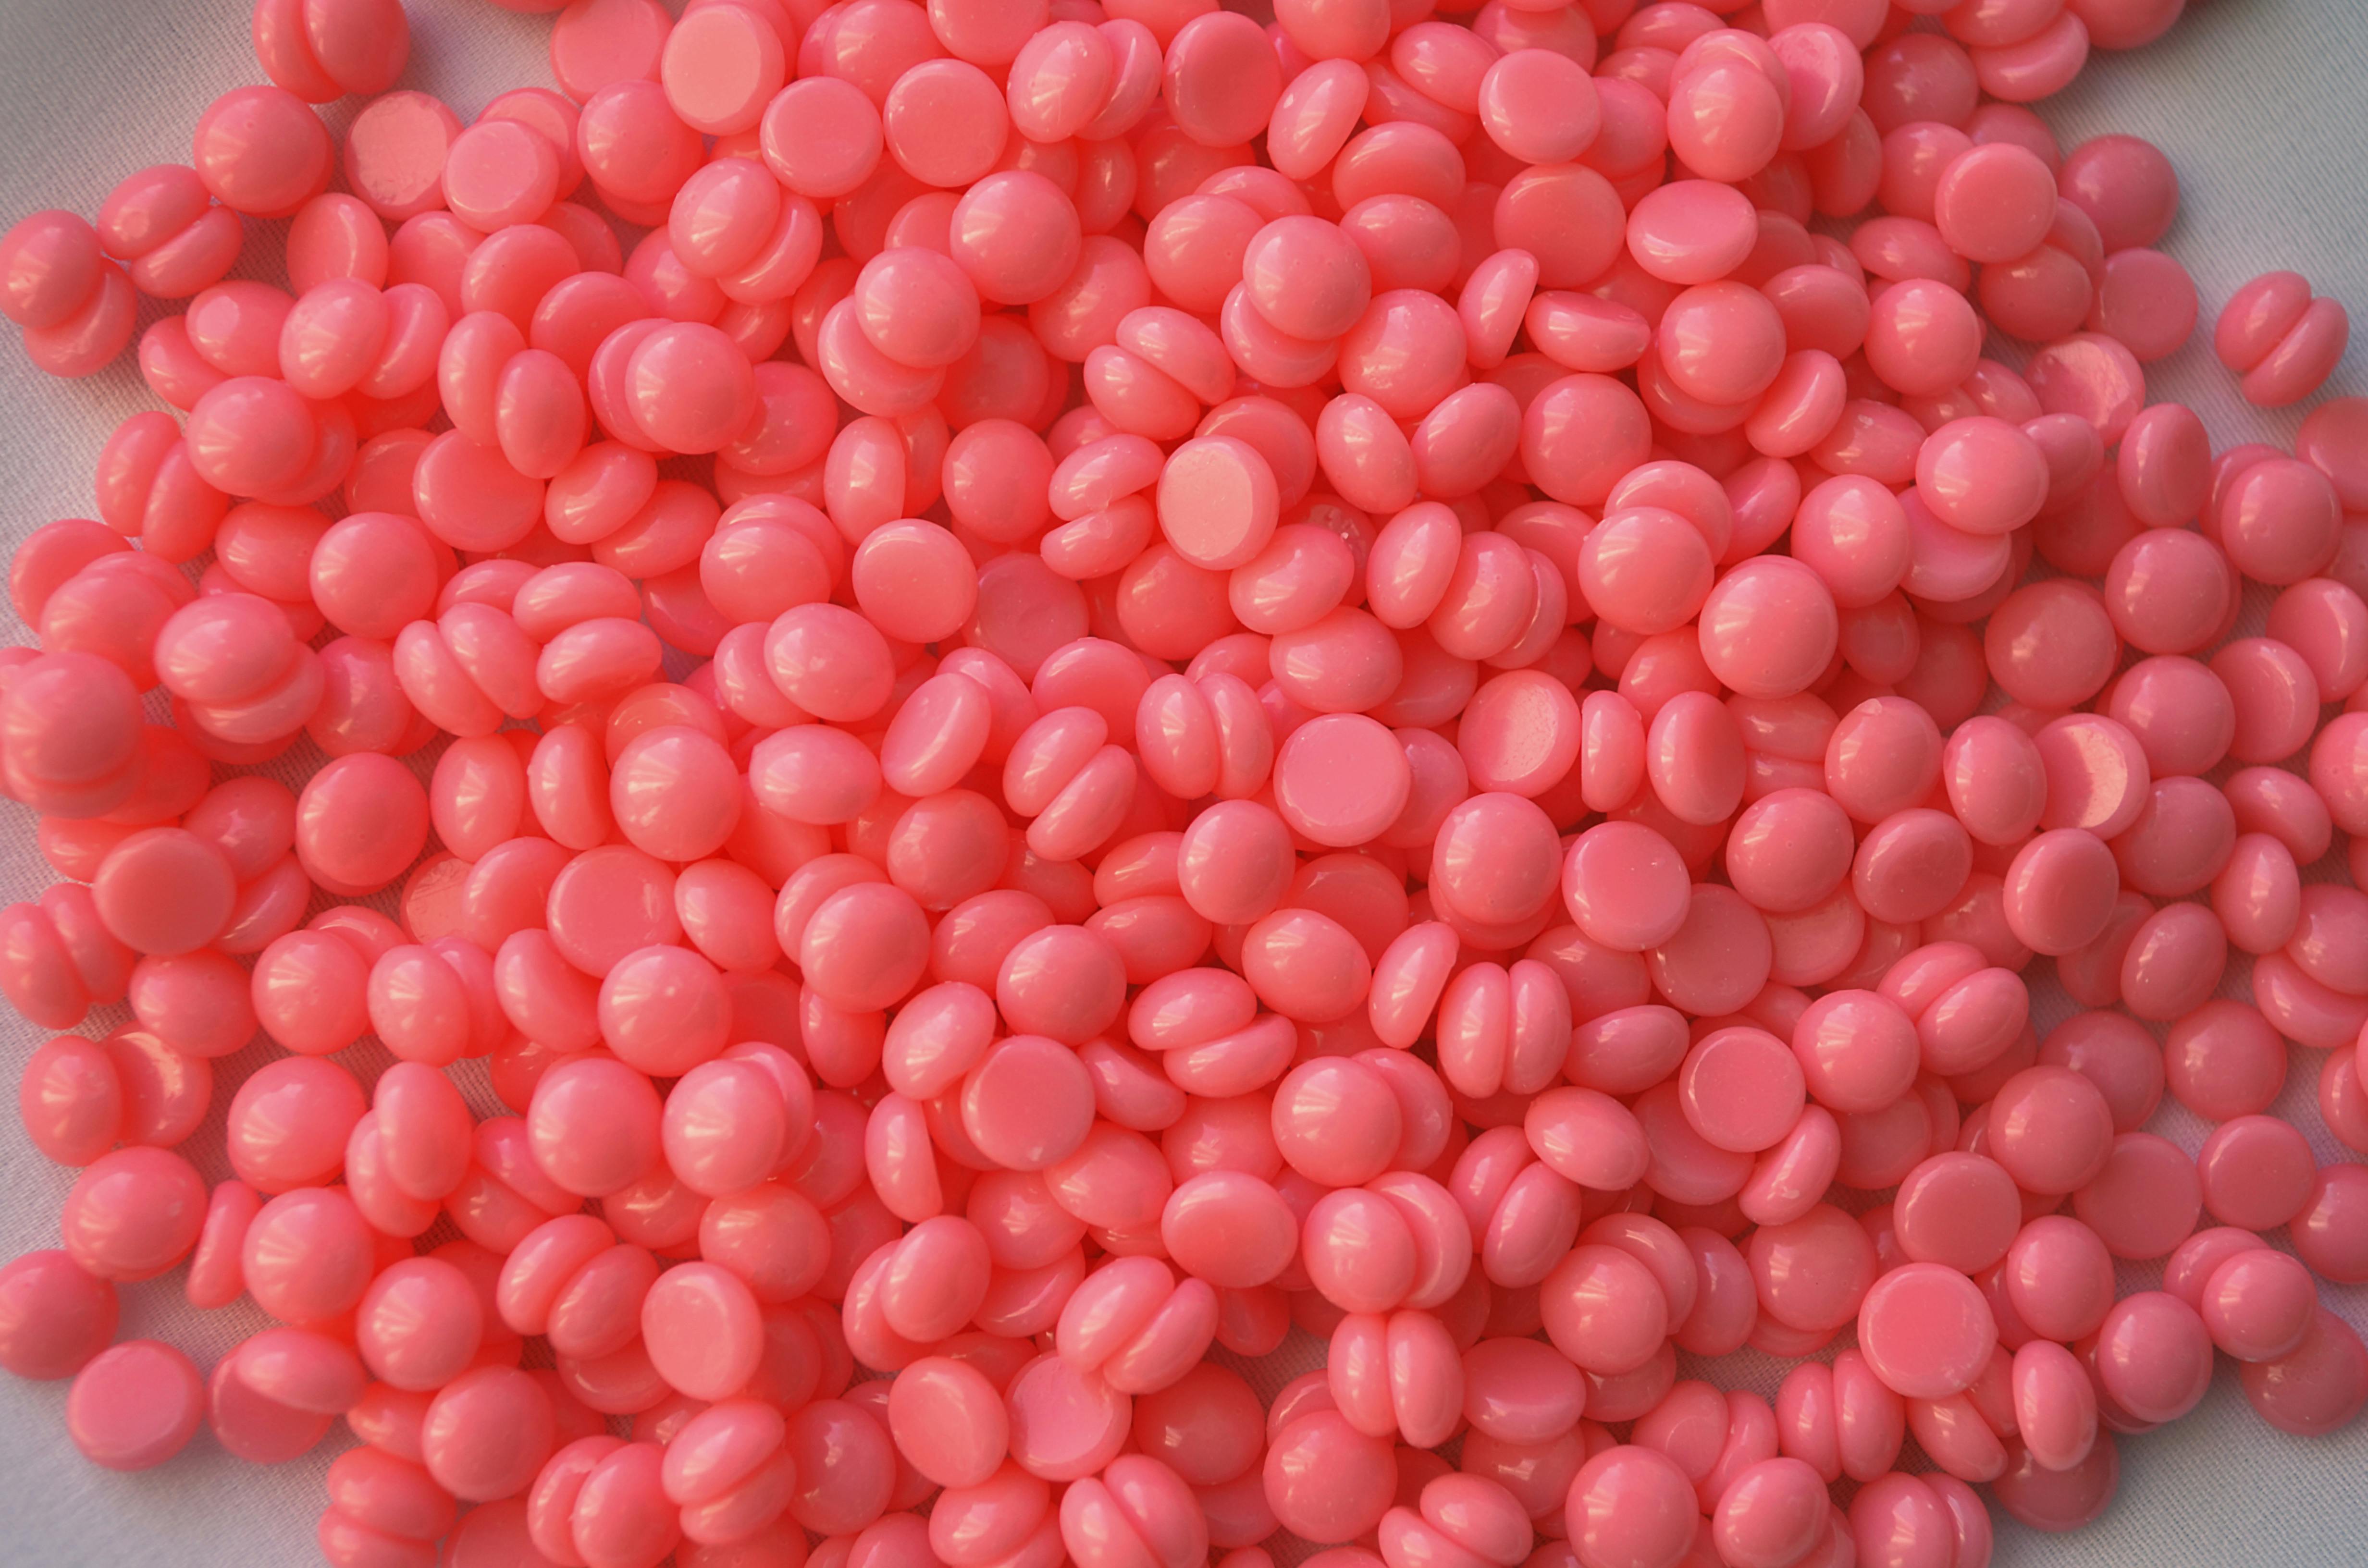  Wax Beads (Fit Gel) Hard Wax Beads for Hair Removal